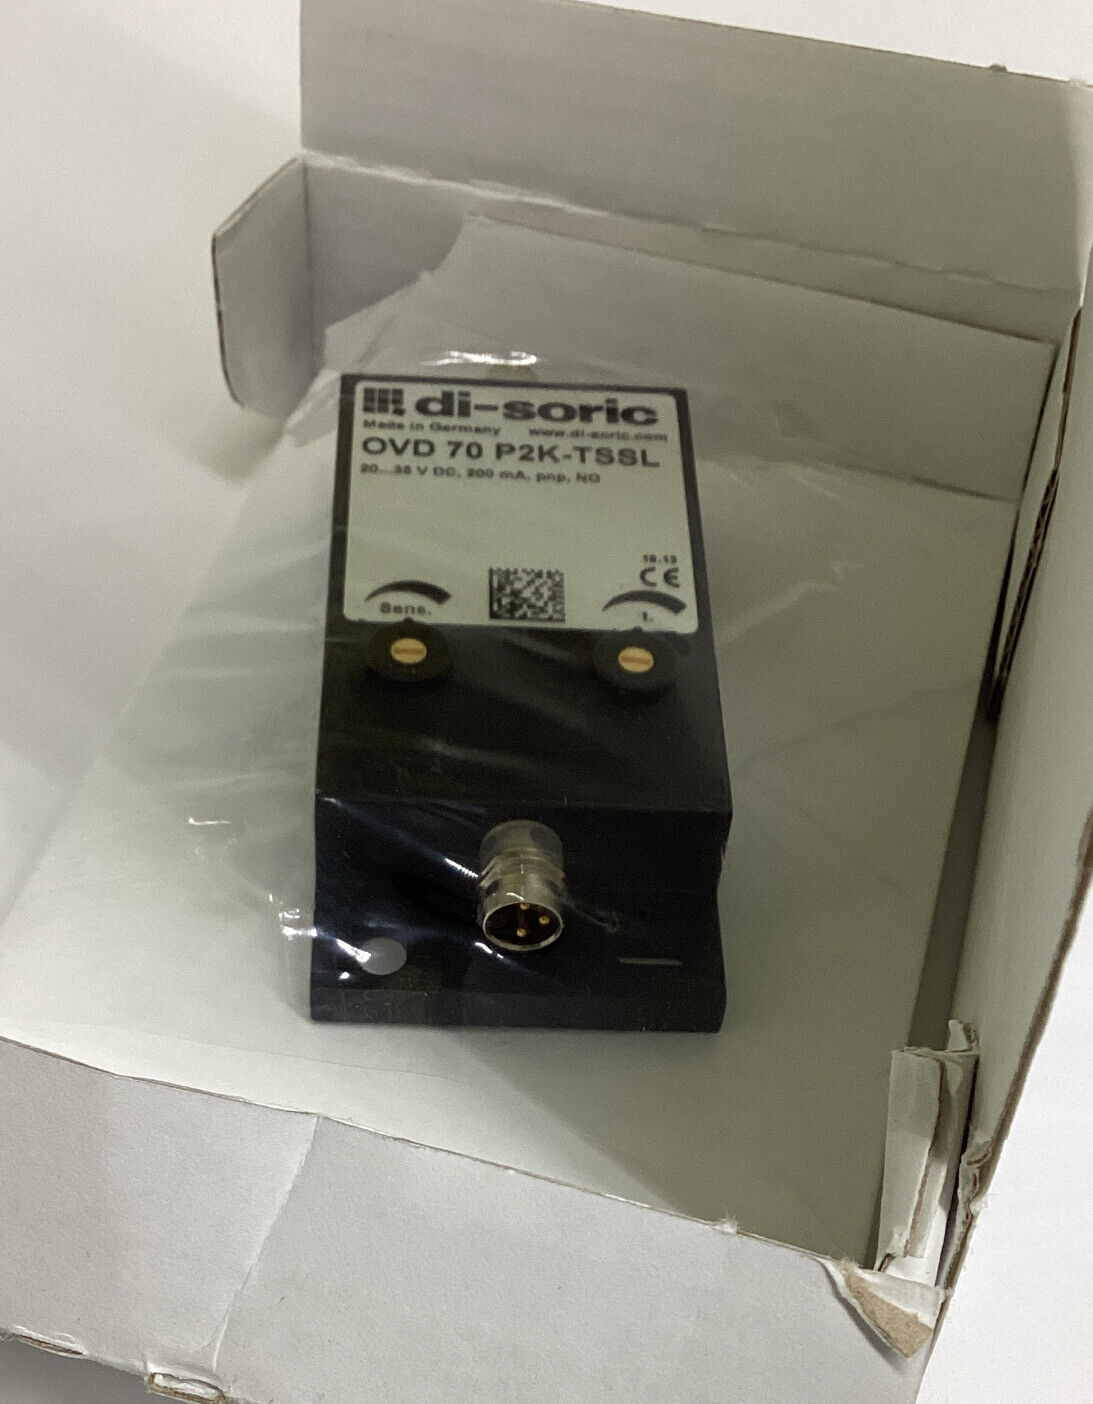 Di-Soric OVD 70 P2K-TSSL / 201577 Amplifier for Ring Light Barrier (CL284)